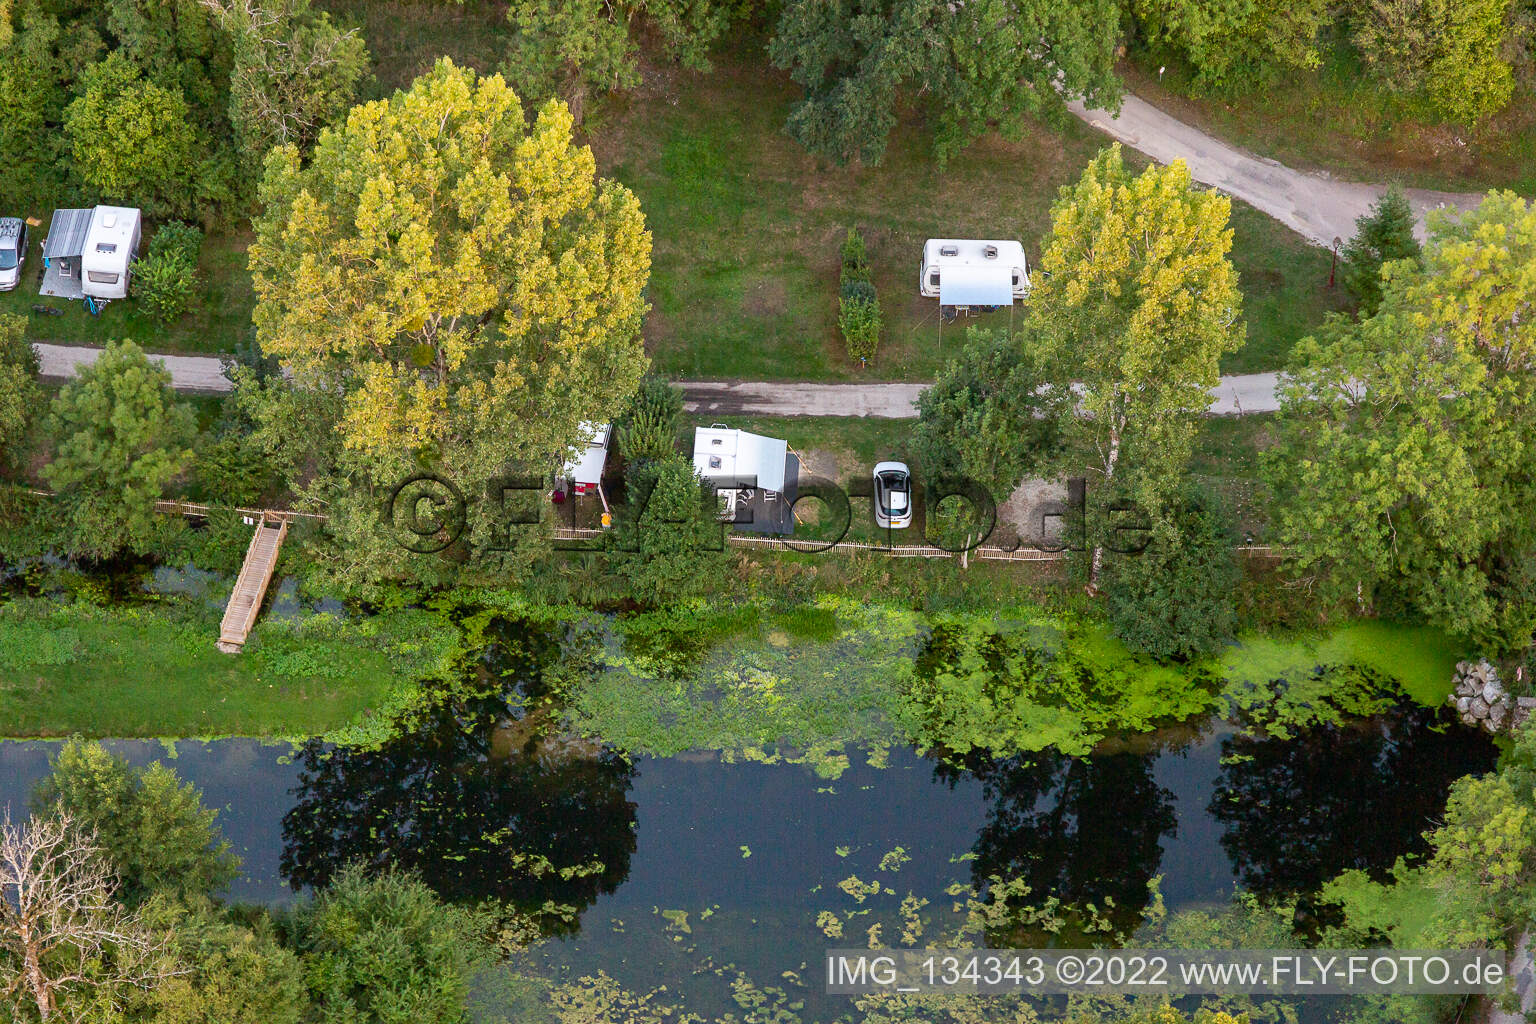 Camping SAS Forge de Sainte Marie in Thonnance-les-Moulins in the state Haute Marne, France from above